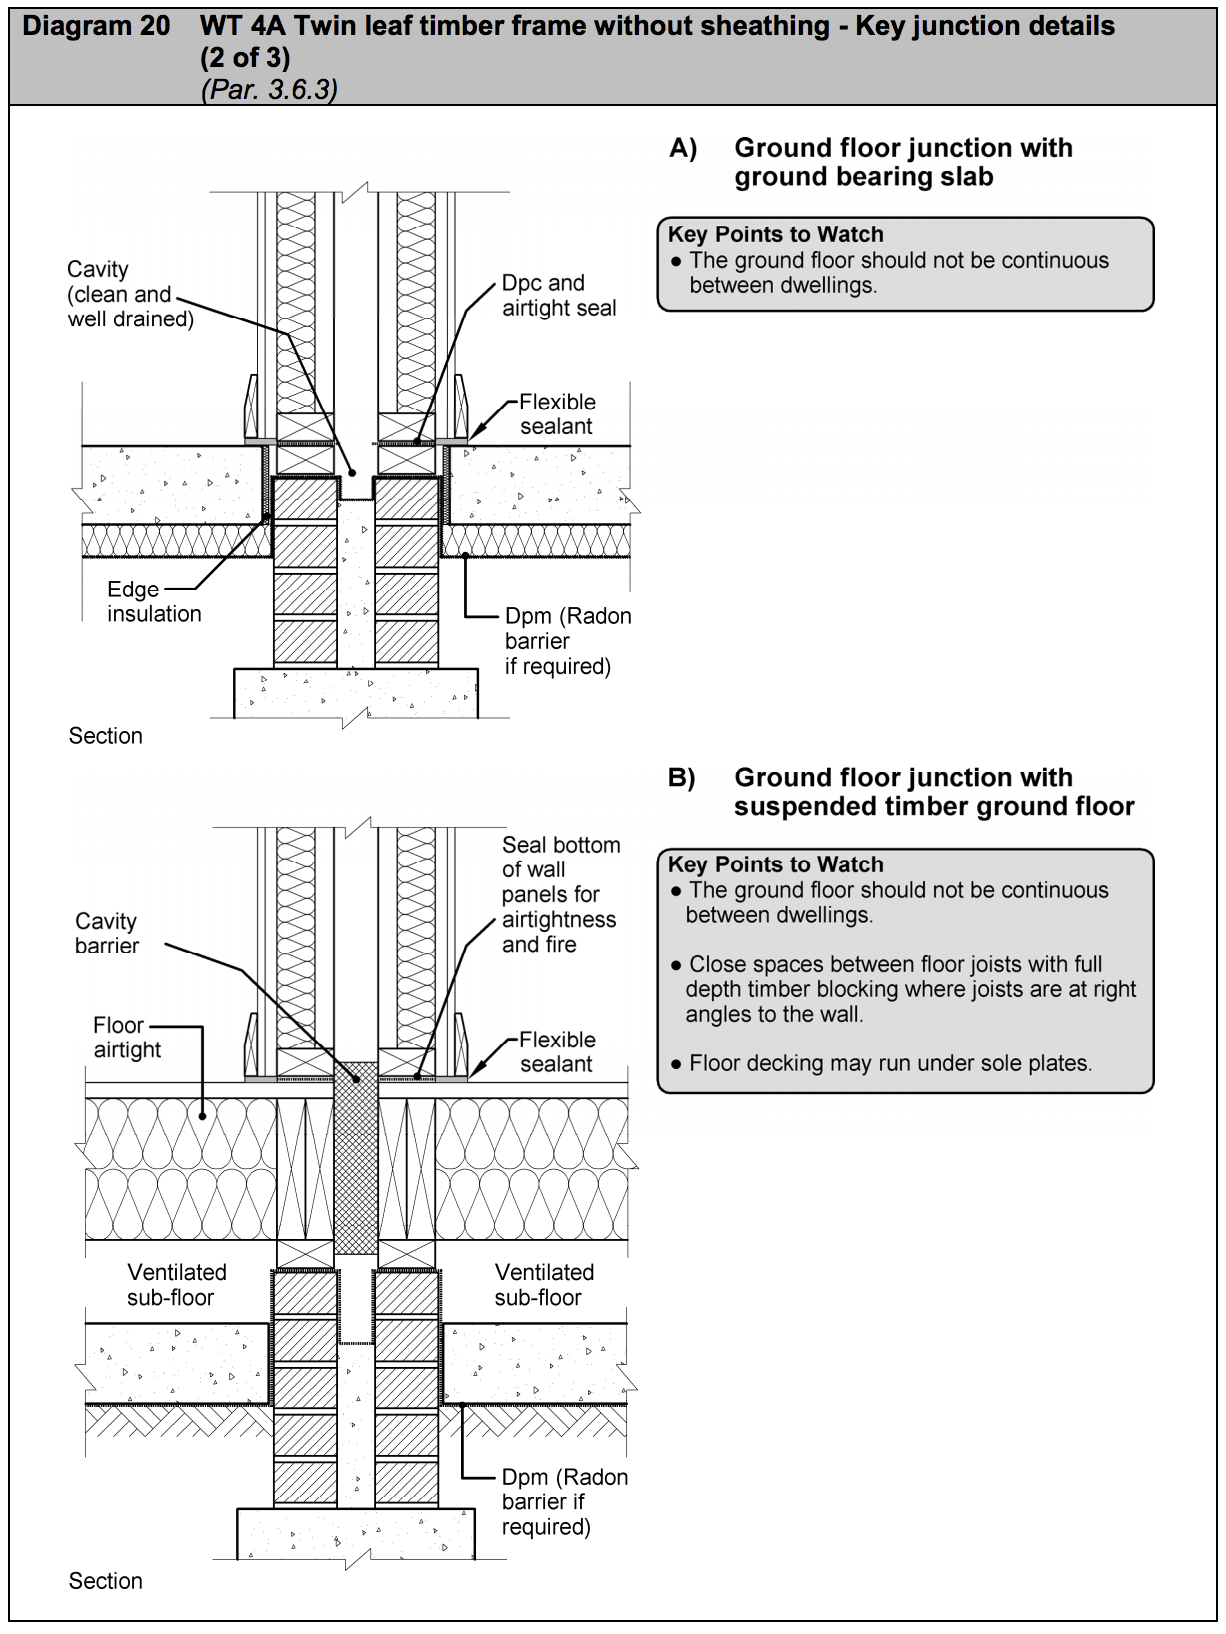 Diagram HE20 - WT 4A Twin leaf timber frame without sheathing - key junction details (2 of 3) - Extract from TGD E